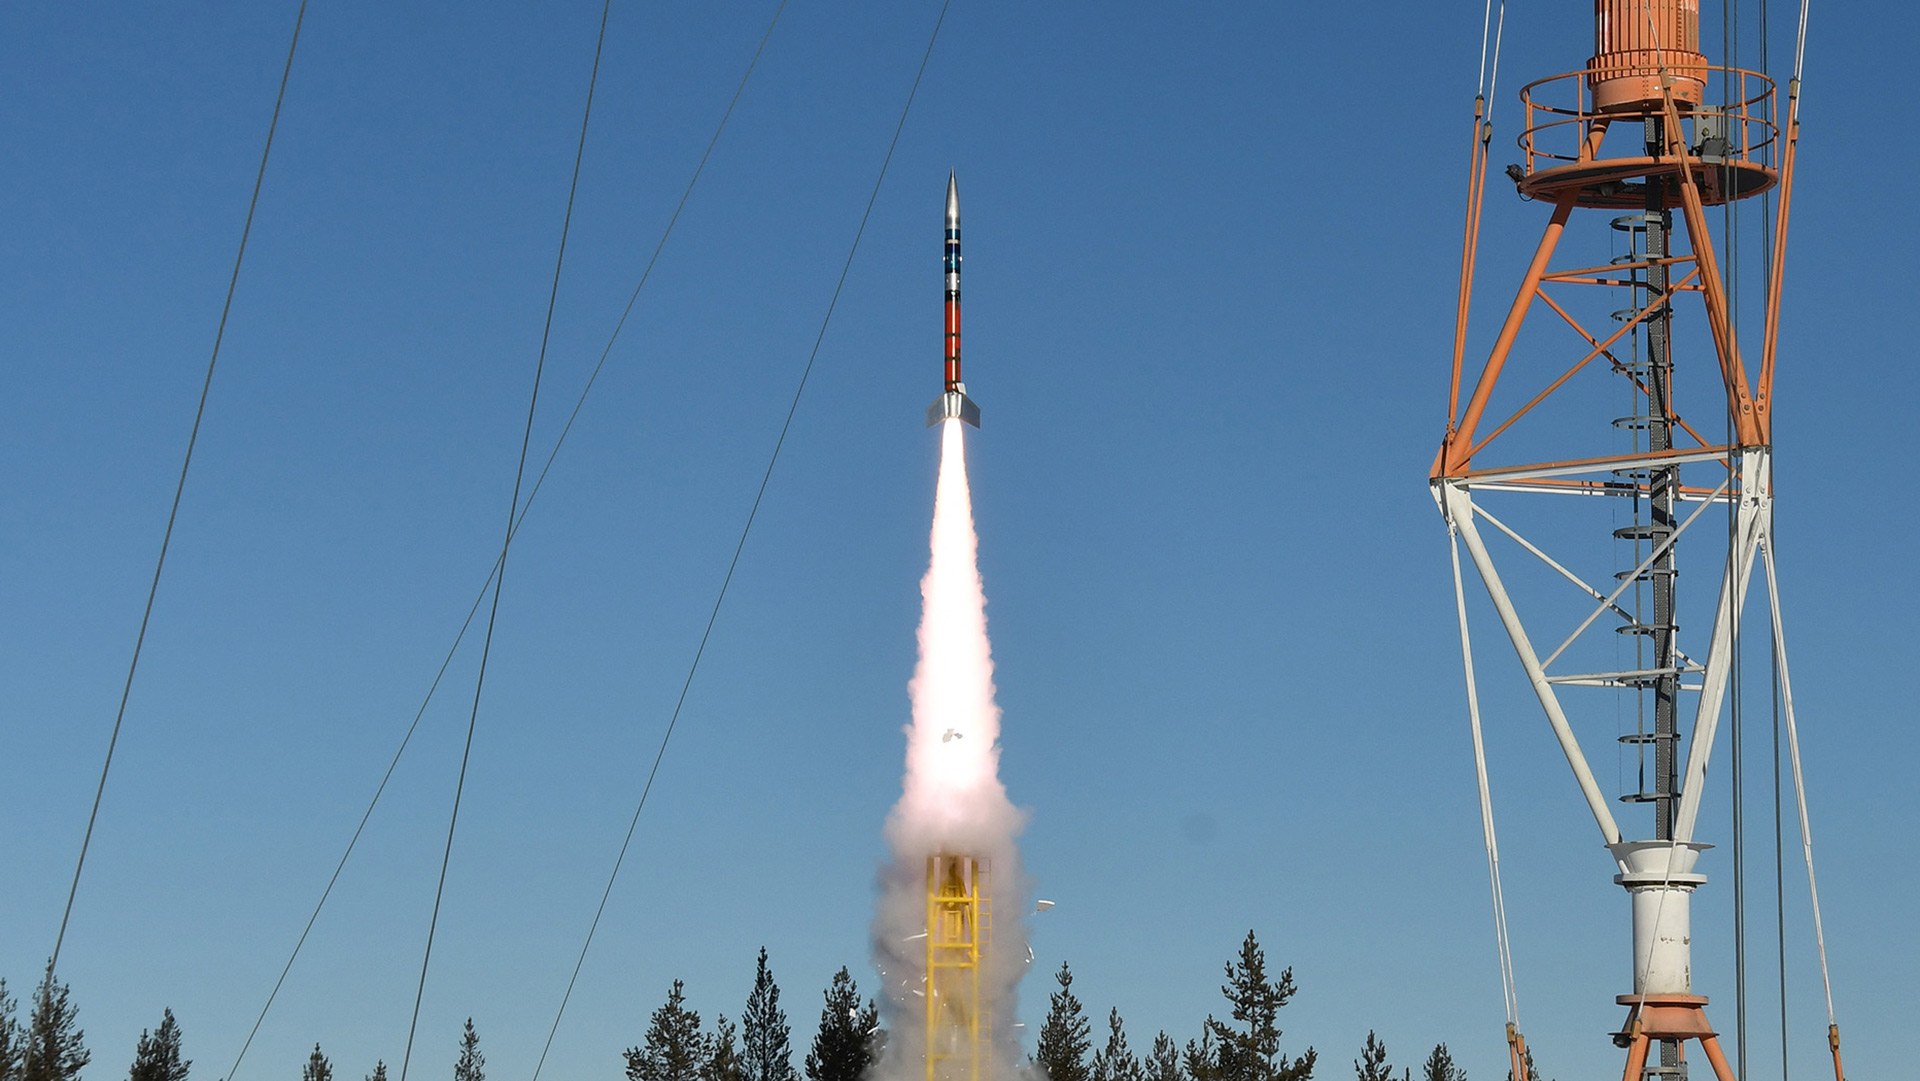 Sounding rockets are launched from the Kiruna rocket range in northern Sweden